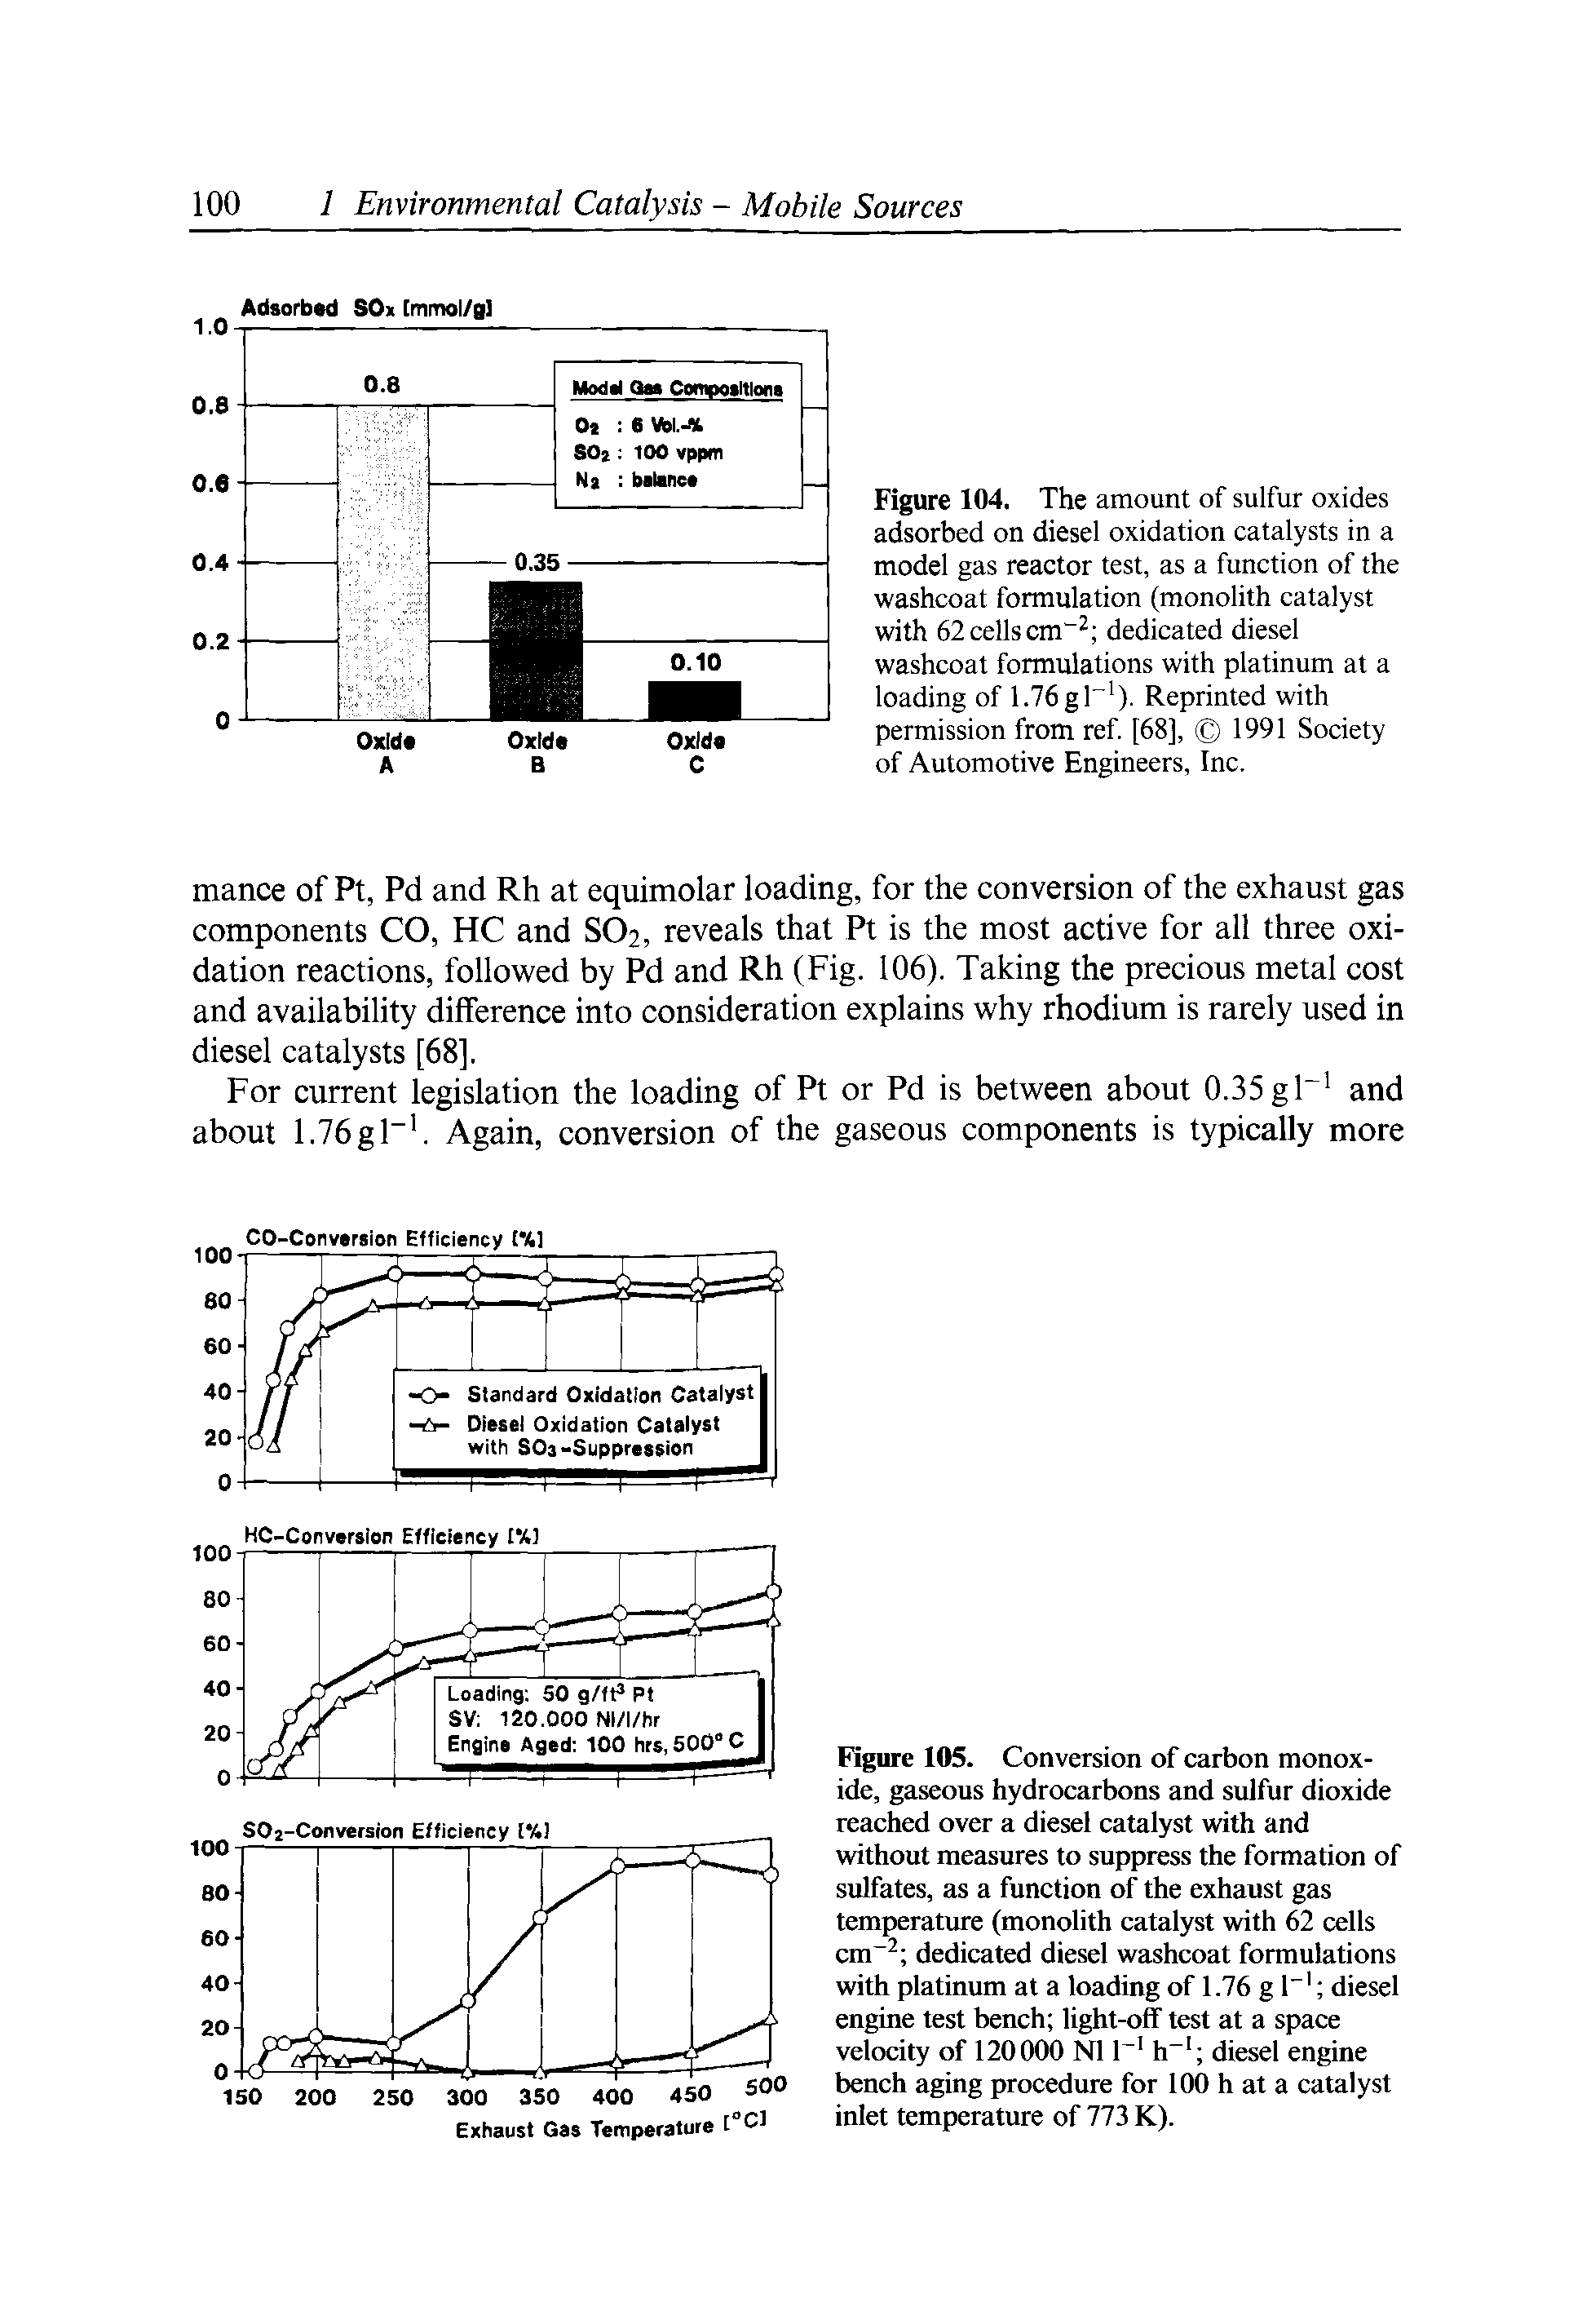 Figure 1 5. Conversion of carbon monoxide, gaseous hydrocarbons and sulfur dioxide reached over a diesel catalyst with and without measures to suppress the formation of sulfates, as a function of the exhaust gas temperature (monolith catalyst with 62 cells cm dedicated diesel washcoat formulations with platinum at a loading of 1.76 g I" diesel engine test bench light-off test at a space velocity of 120000 N1 F h diesel engine bench aging procedure for 100 h at a catalyst inlet temperature of 773 K).